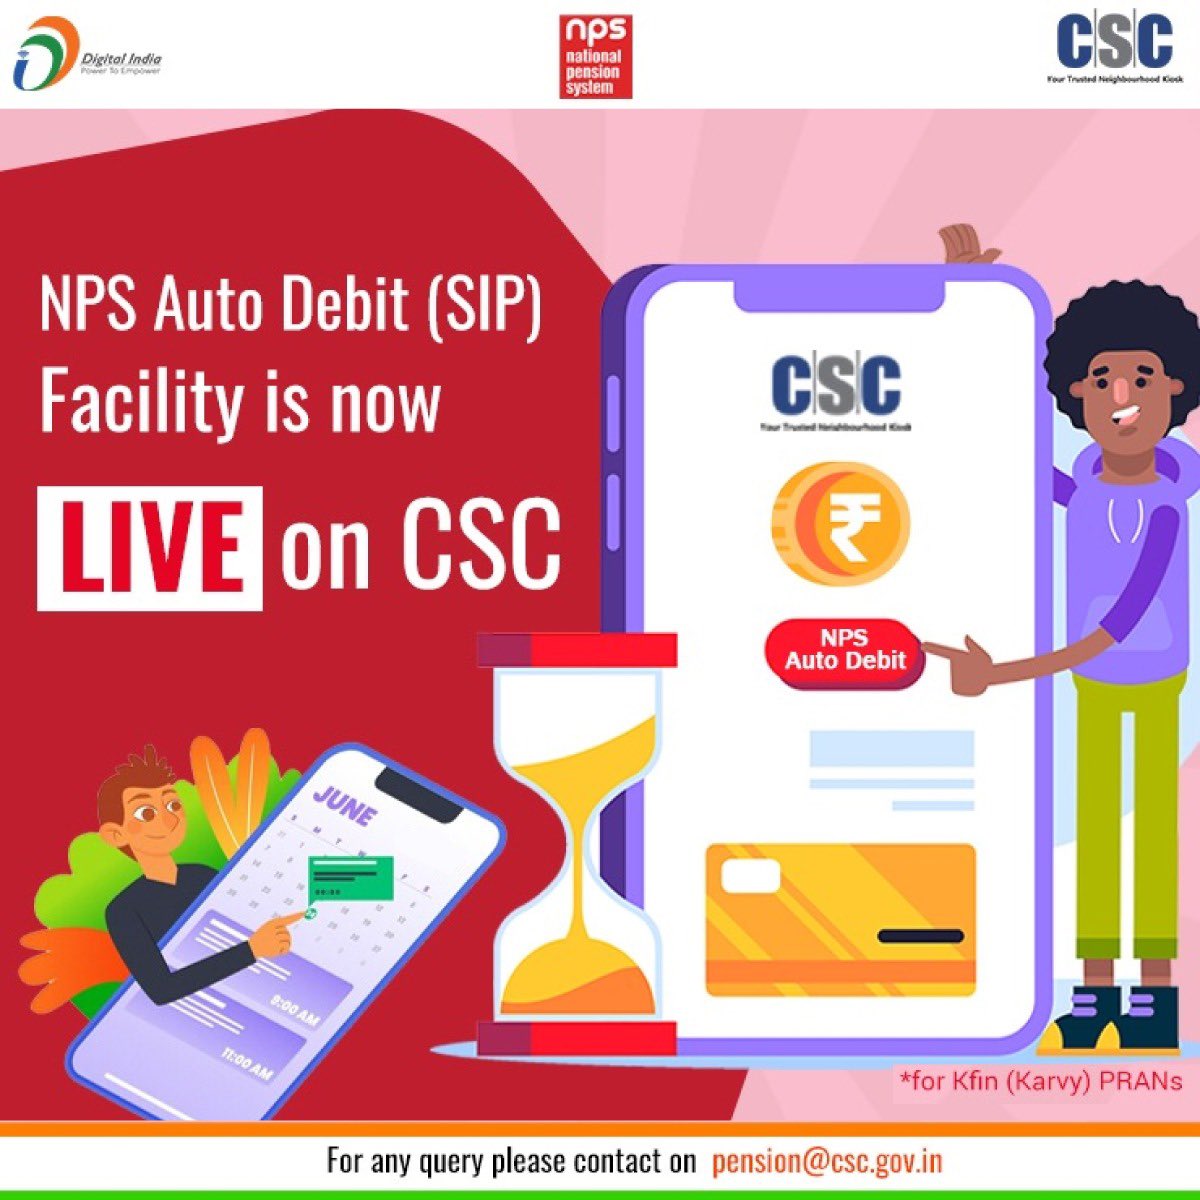 Dear VLEs! NPS Auto Debit (SIP) Facility is now LIVE through #CSC... #NPS Auto Debit Benefits: -Saving you the hassle of manually transferring funds -Helps in maintaining Financial Discipline